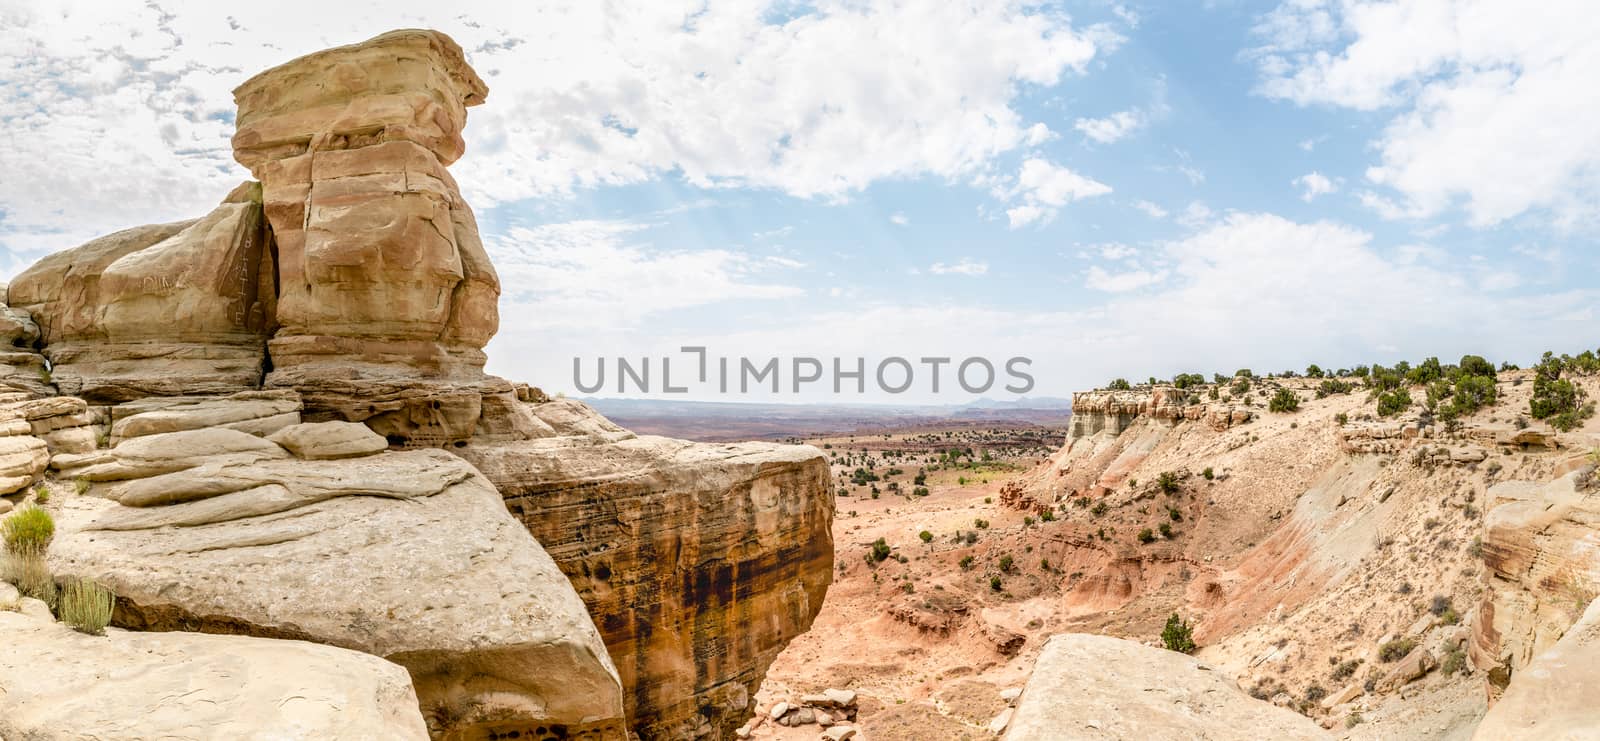 Panorama of cliffs in the San Rafael Swell in Utah off I-70 by Njean